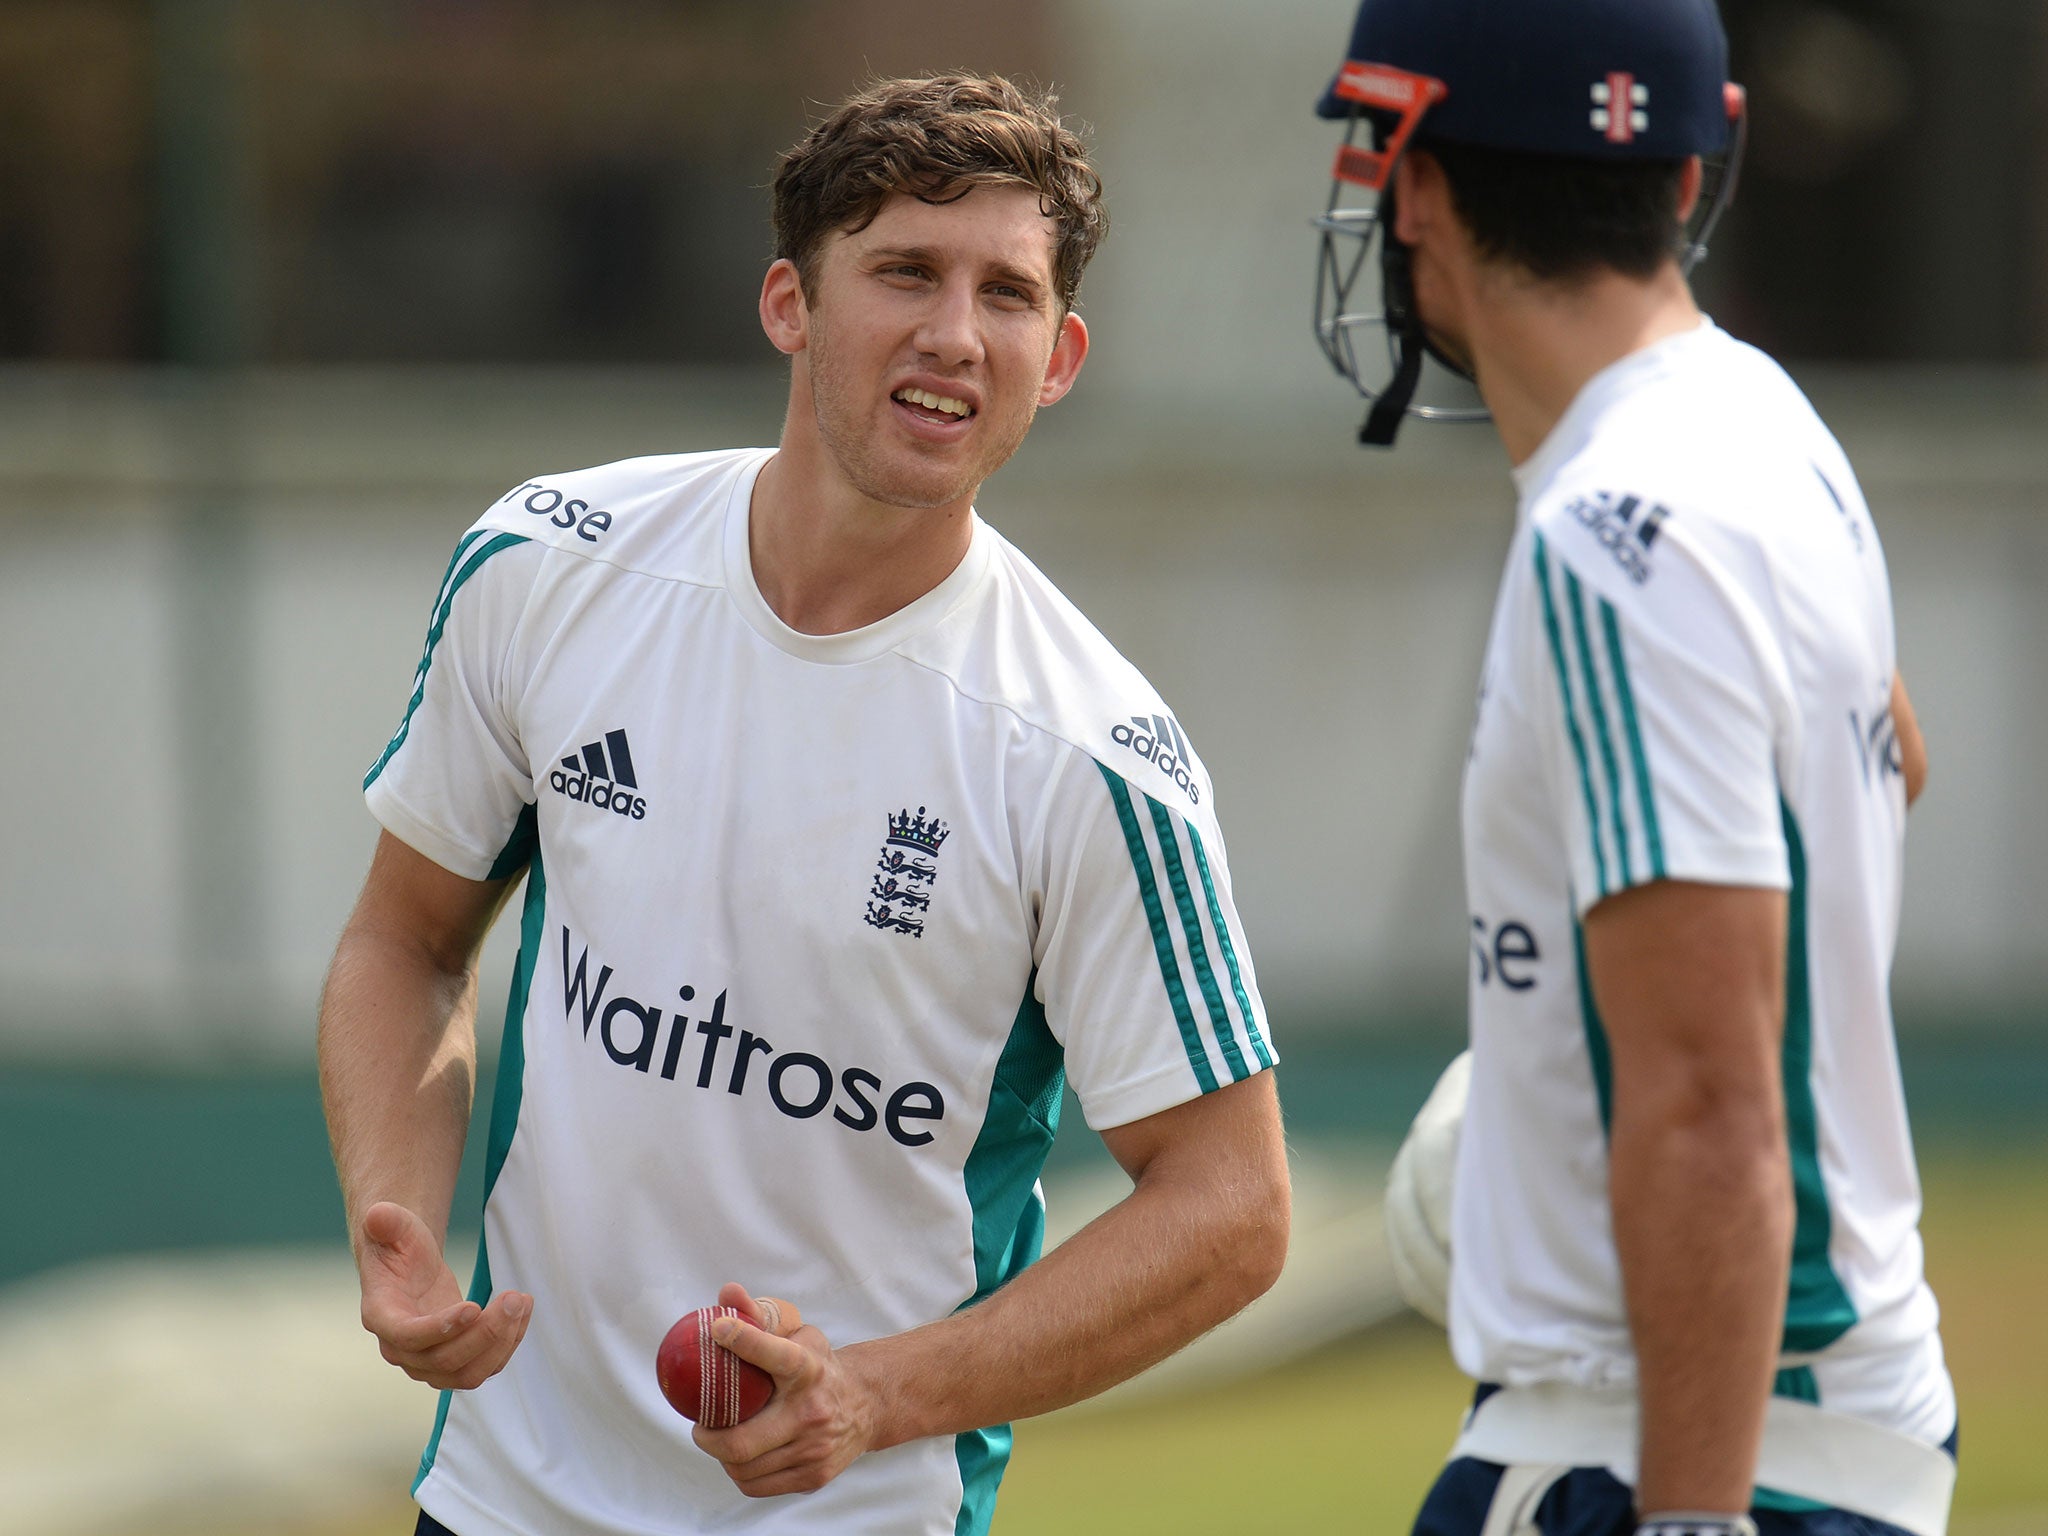 Zafar Ansari talks spin with Alastair Cook in the nets in Dhaka ahead of England's second Test against Bangladesh